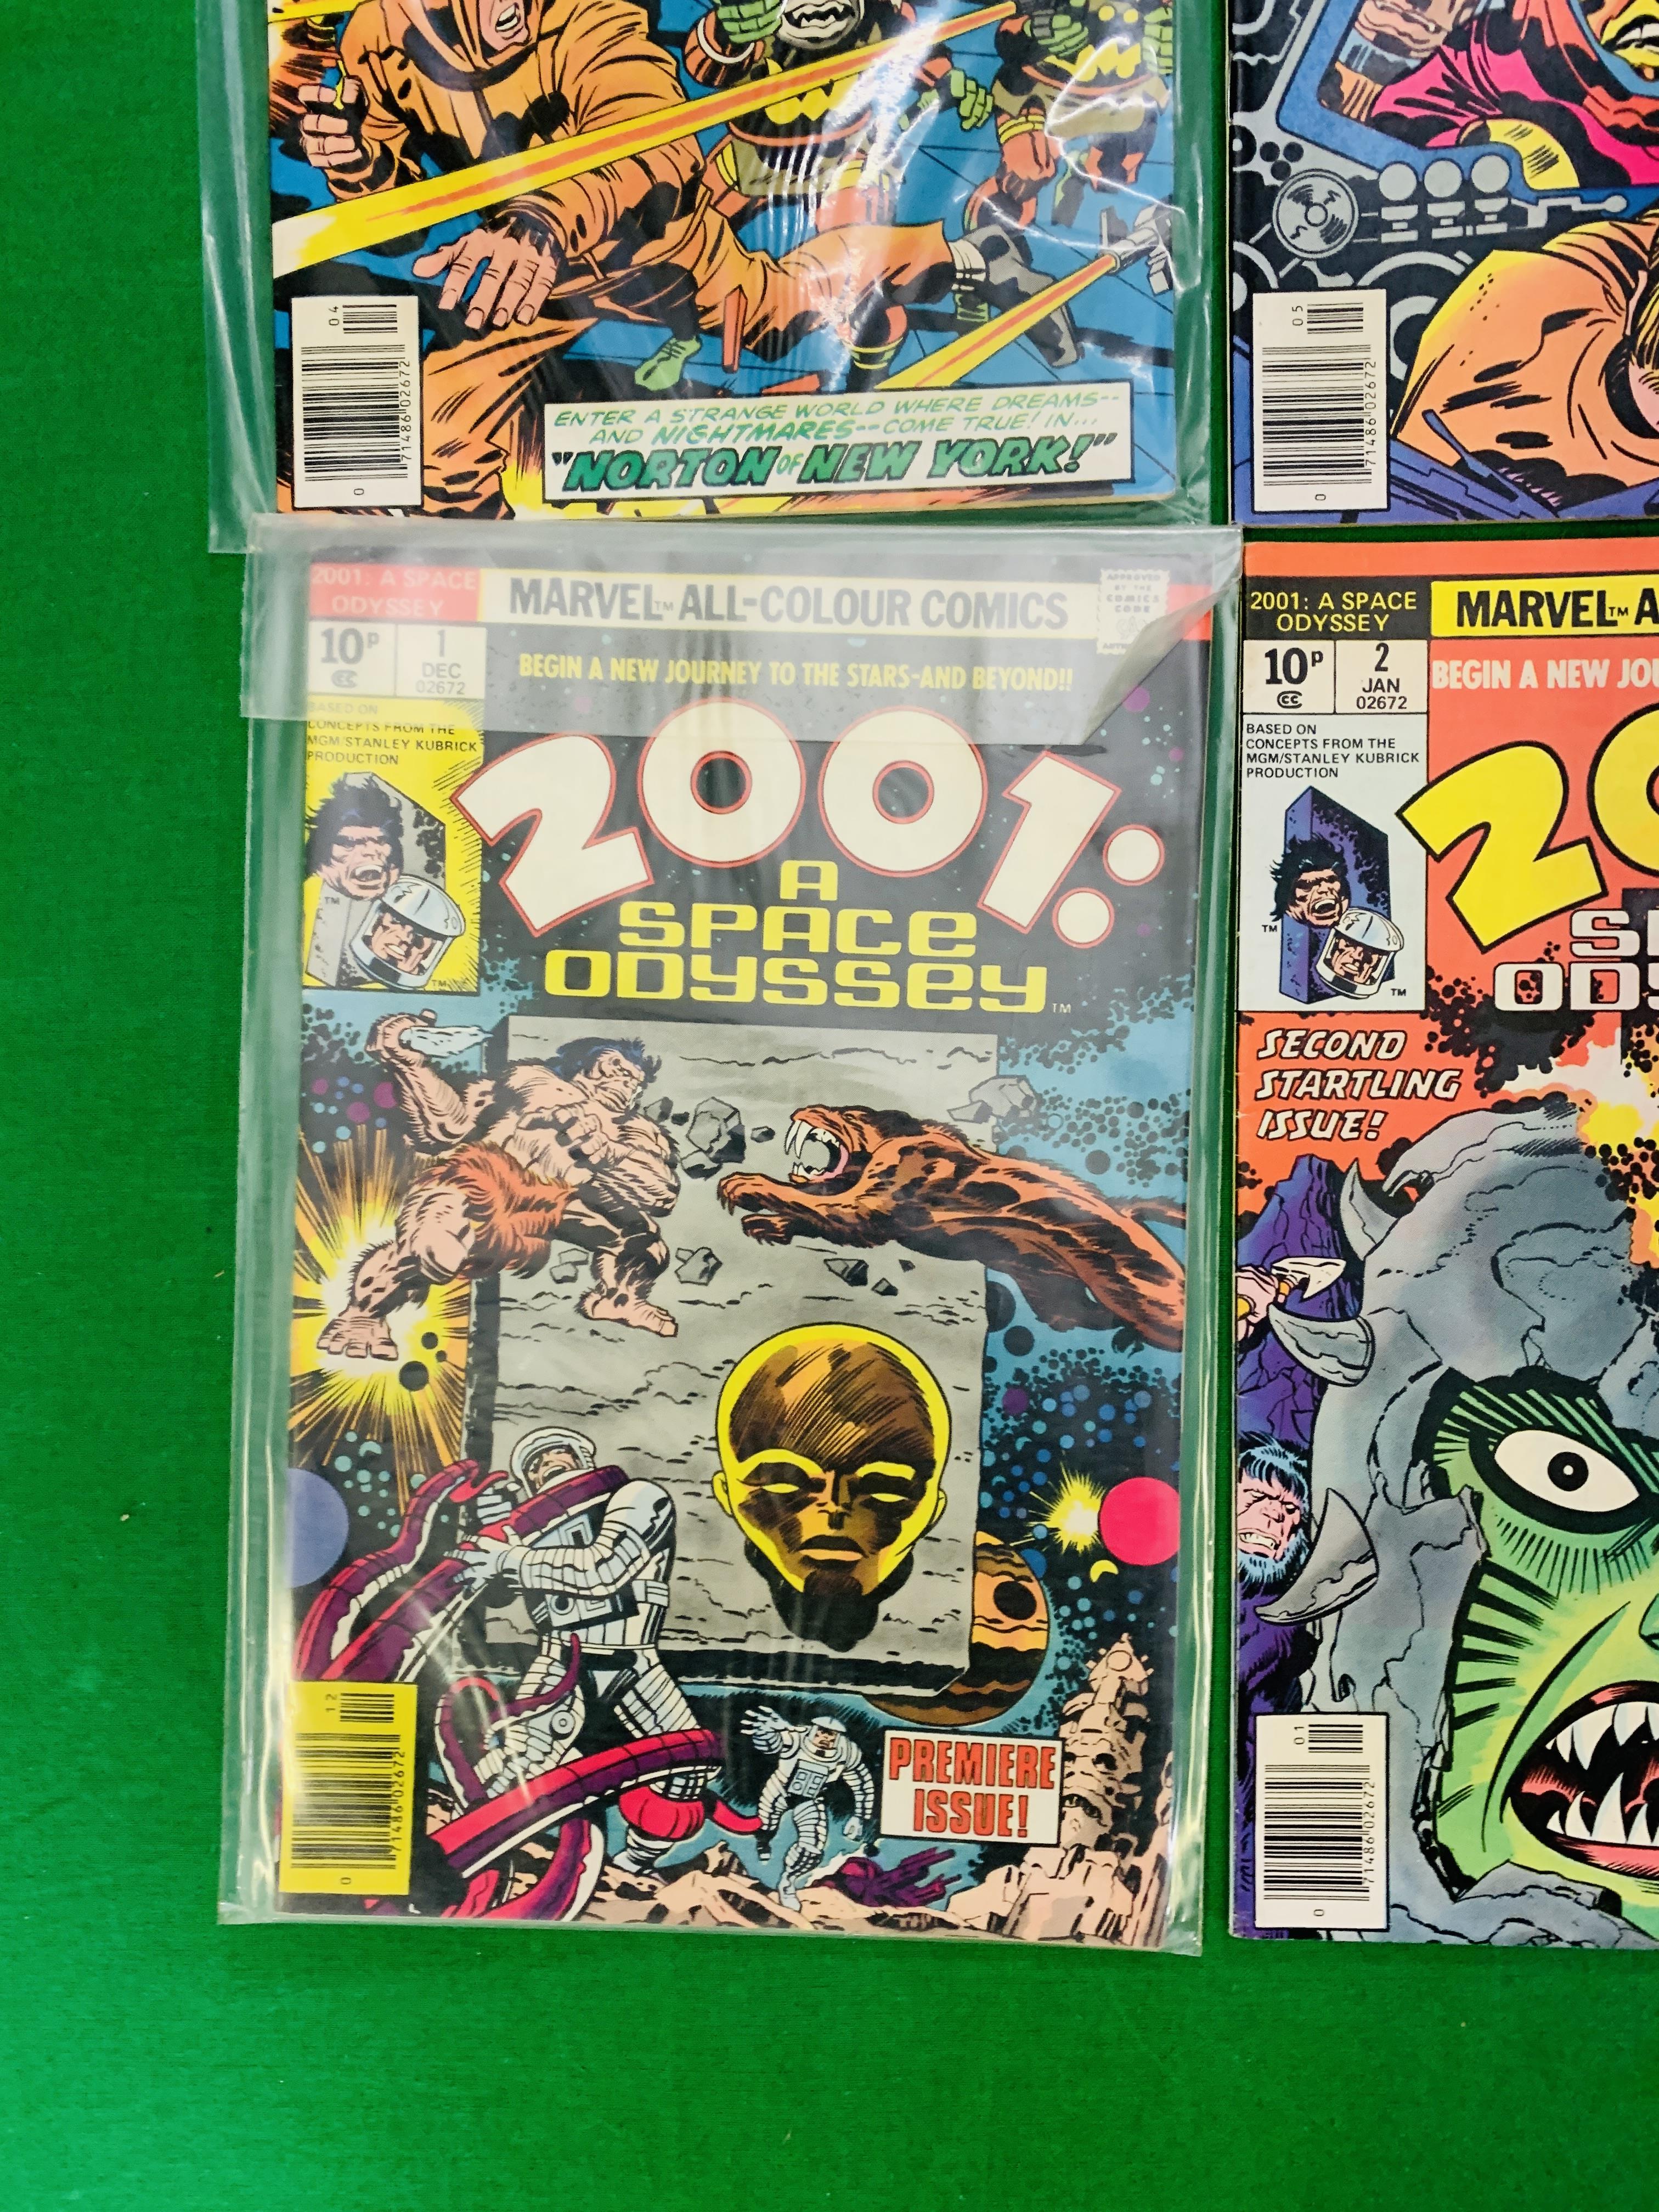 MARVEL COMICS 2001: A SPACE ODYSSEY NO. 1 - 10 FROM 1976, FIRST APPEARANCE NO. 8. MACHINE MAN X-51. - Image 2 of 11